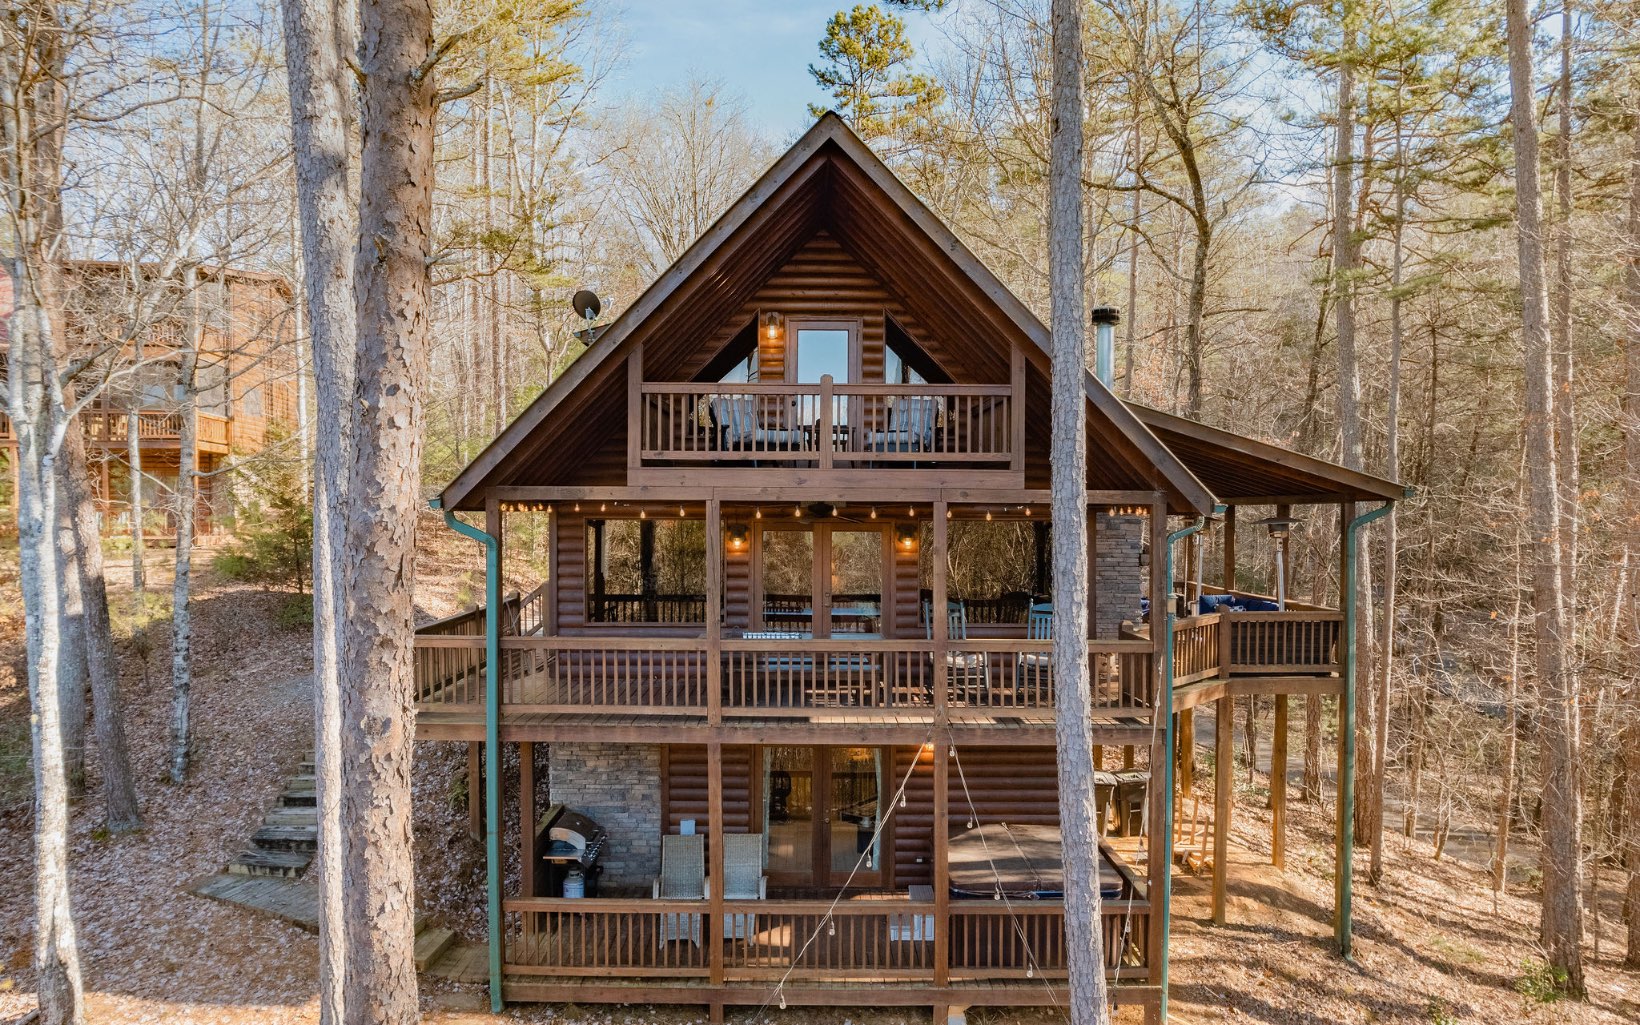 PRICE IMPROVEMENT! Don't miss out on this highly coveted and sought after Aska Adventure Area cabin retreat. Cabin is immaculately maintained and nicely furnished. Property is within walking distance to the Shallowford Bridge on the Toccoa River and all of the fun activities the area has to offer. Activities range from hiking trails, river rapids, dining, gem mining and much more. This spacious cabin will sleep 8 comfortably. Enjoy mountain views, while relaxing in the hot tub or reading a book while chilling on the queen size daybed swing. This cabin literally has it all! Established Rental -with many future dates already booked!